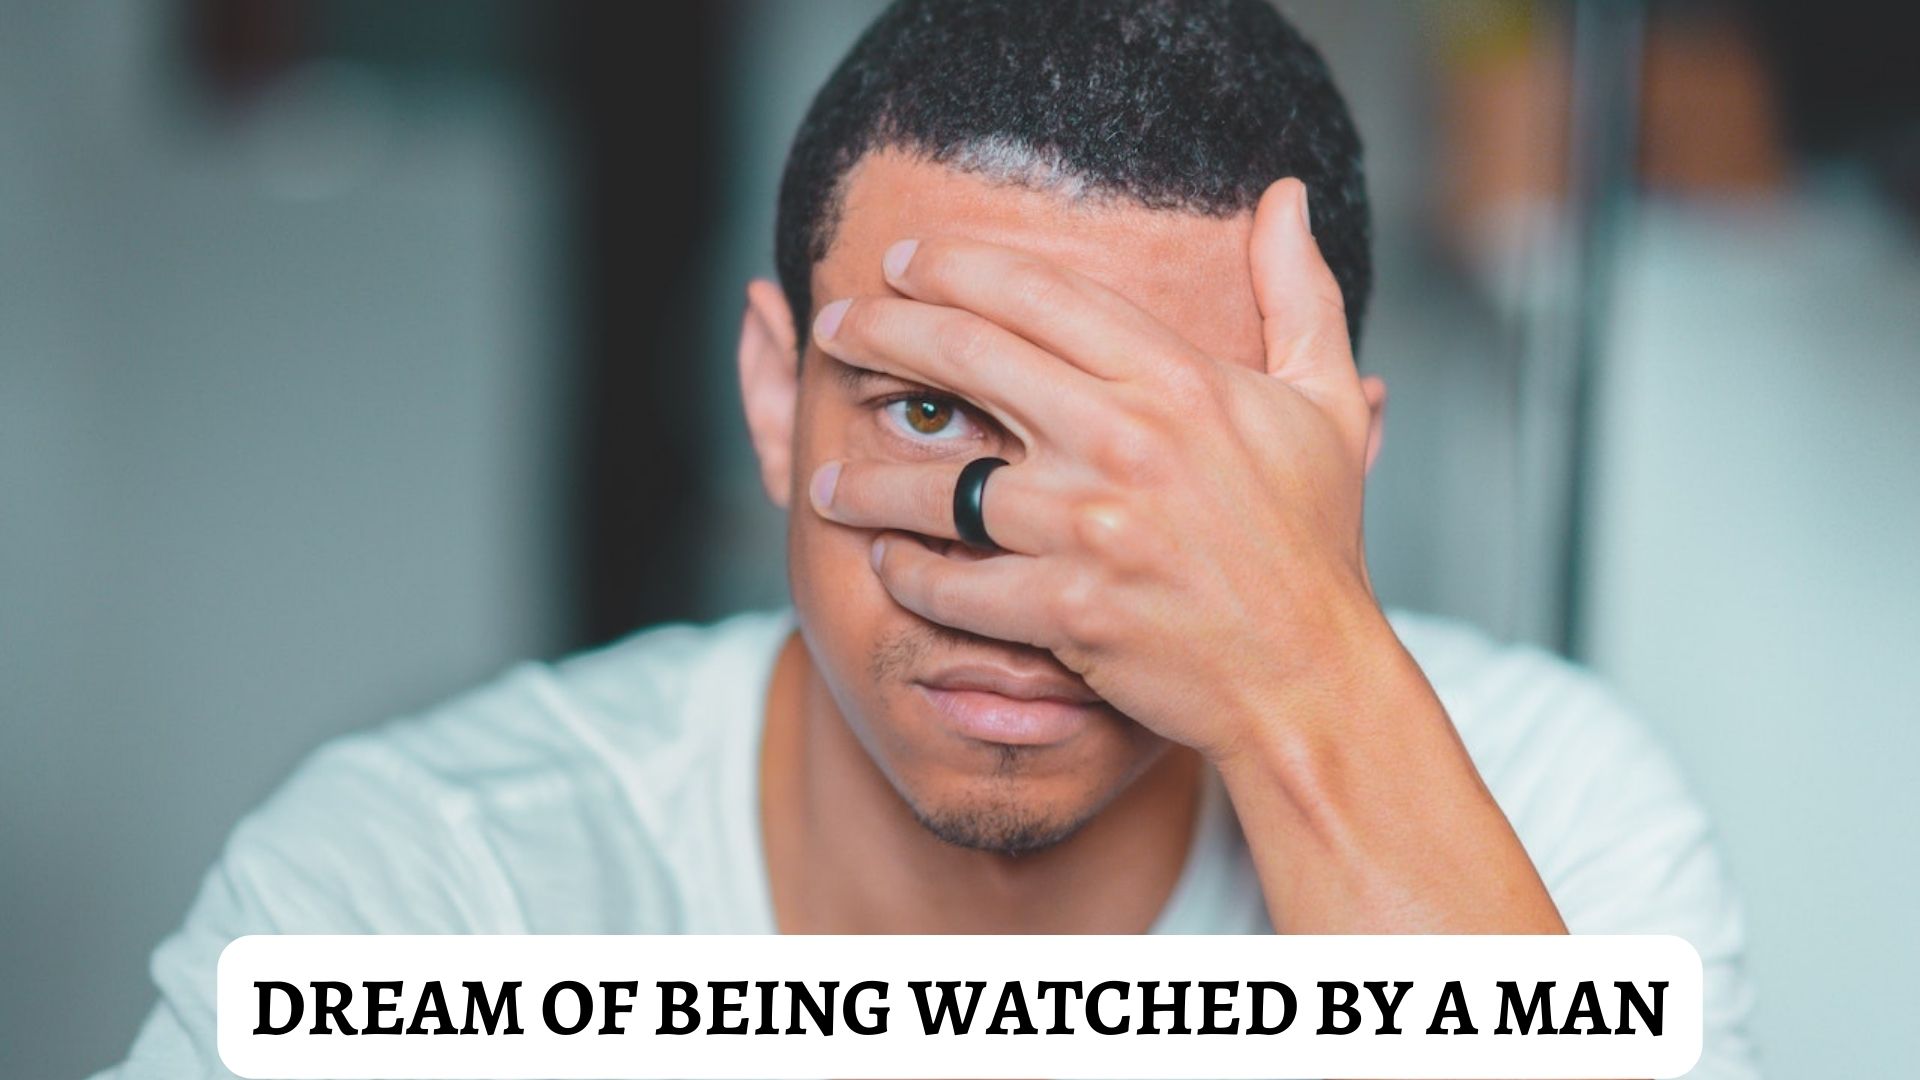 Dream Of Being Watched By A Man - Meaning & Interpretation